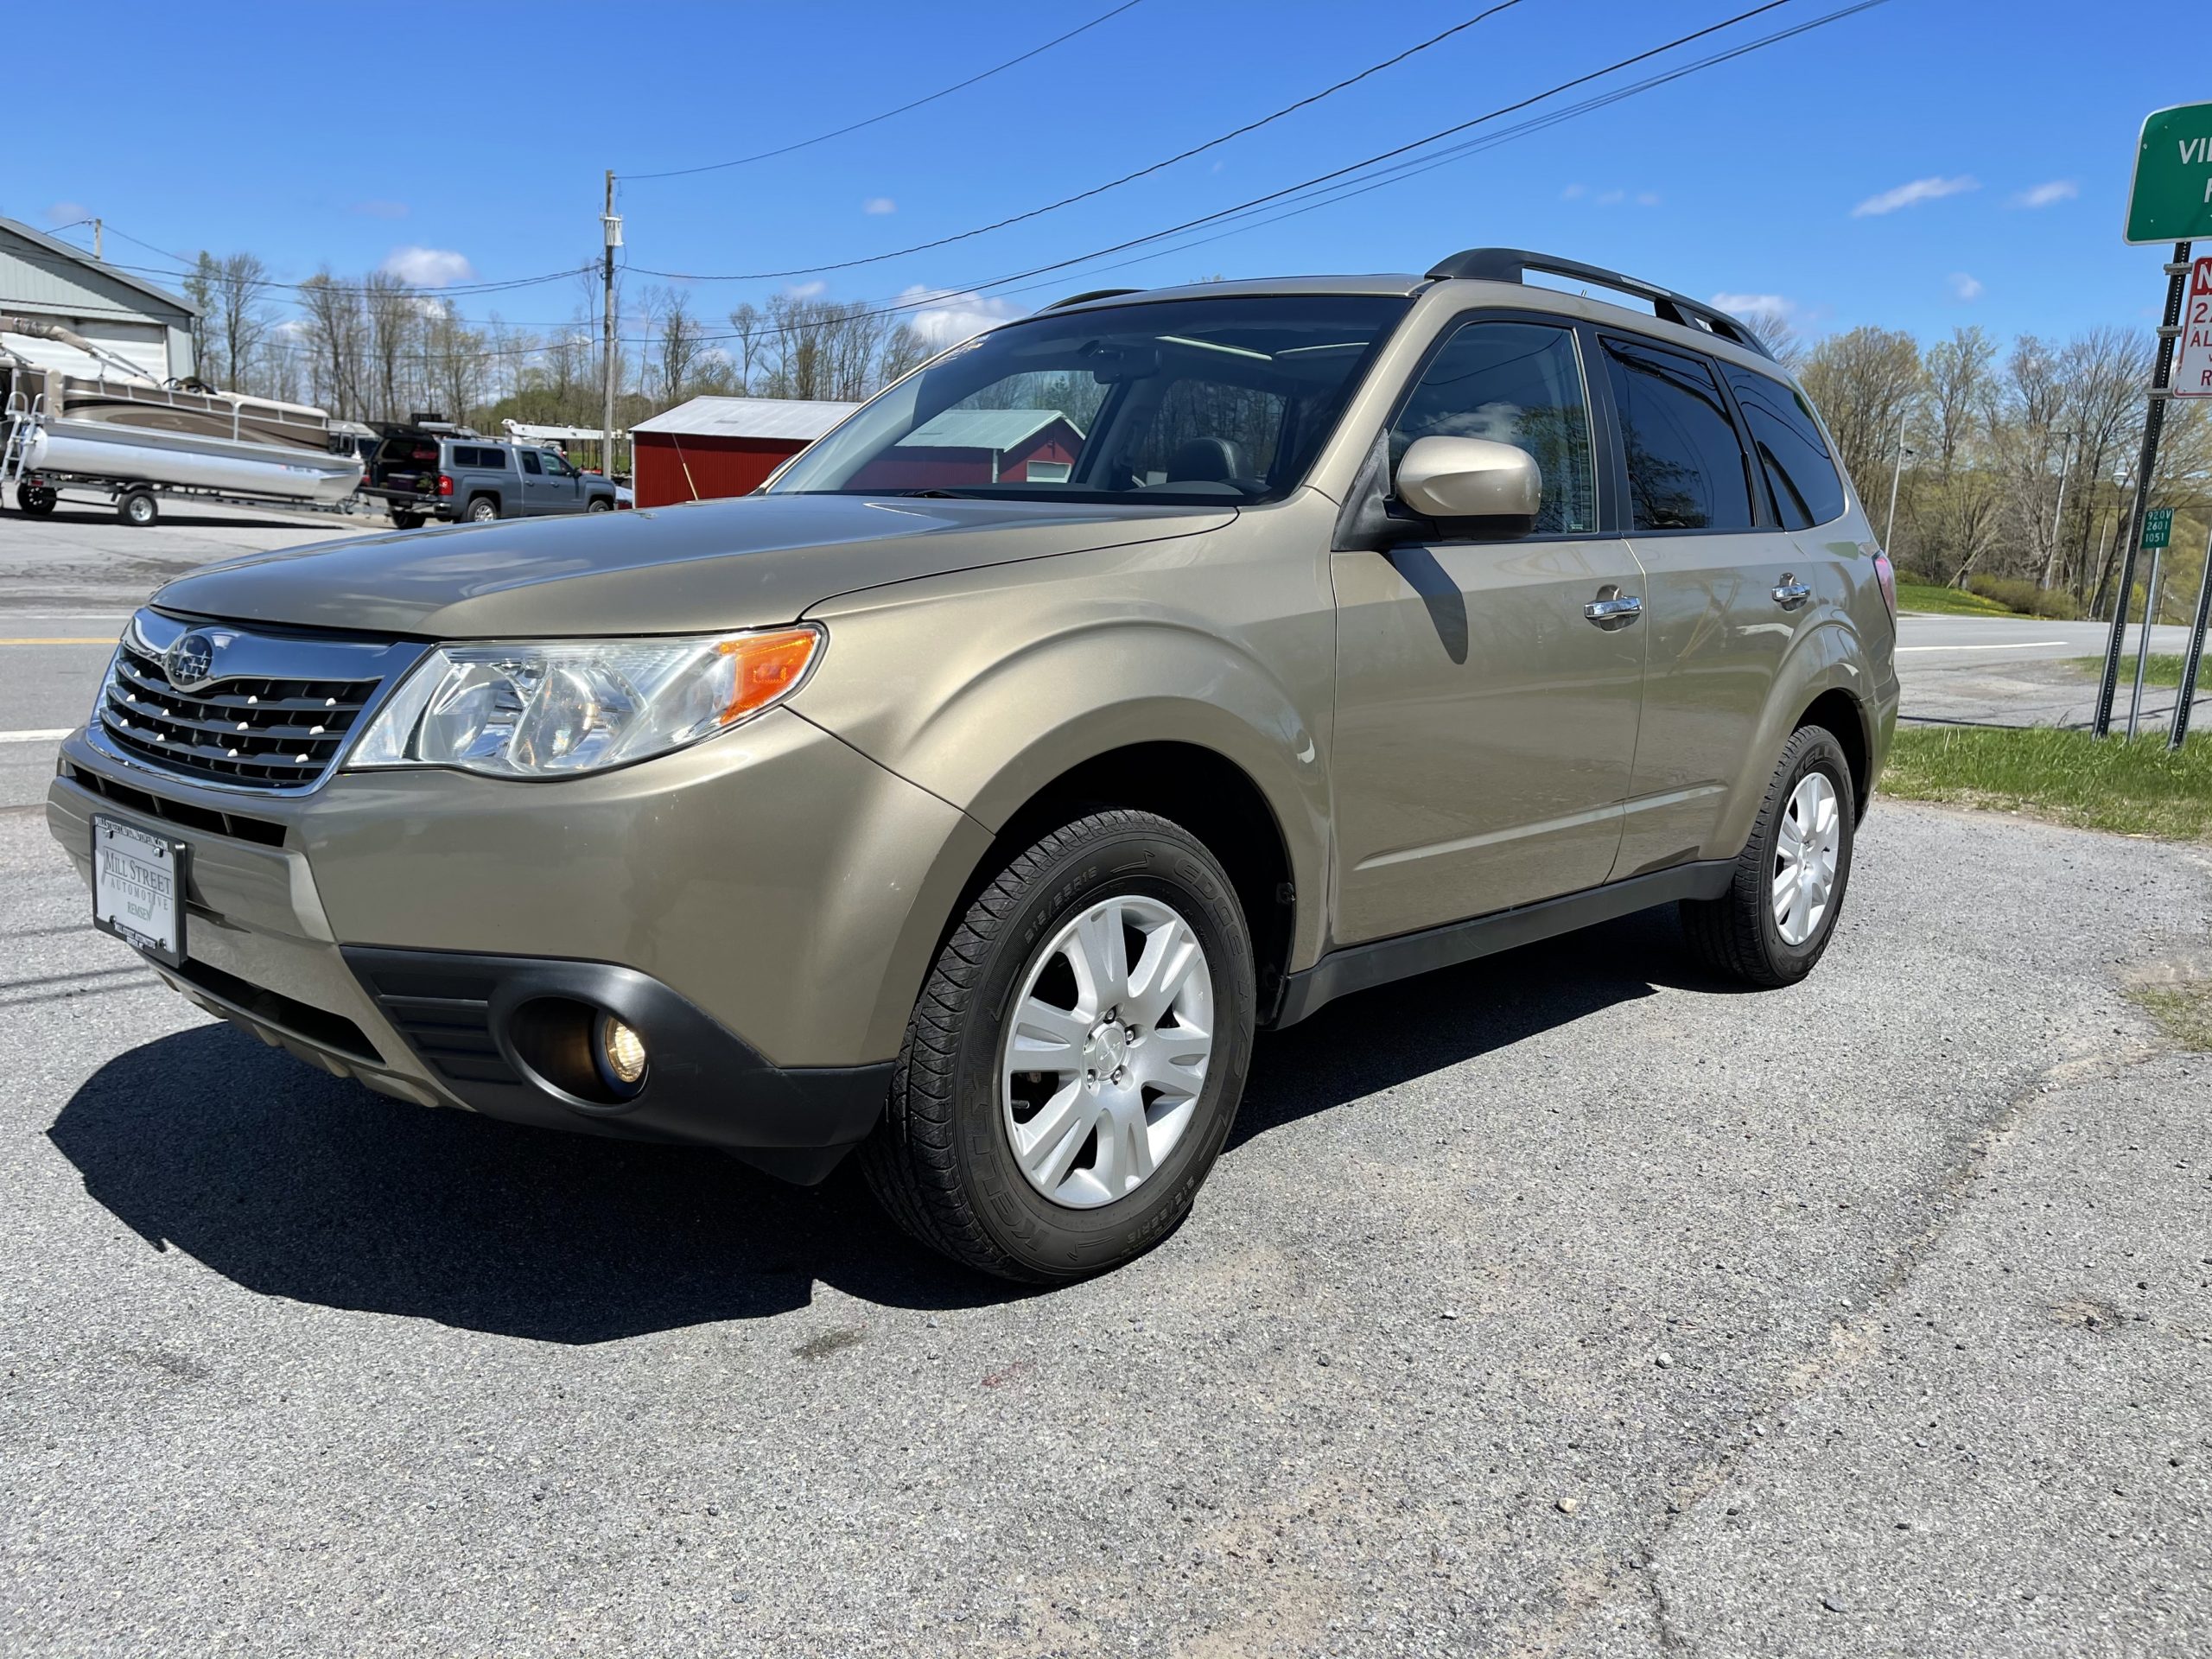 SUBARU FORESTER LL BEAN EDITION SQUEAKY CLEAN SAFE AWD